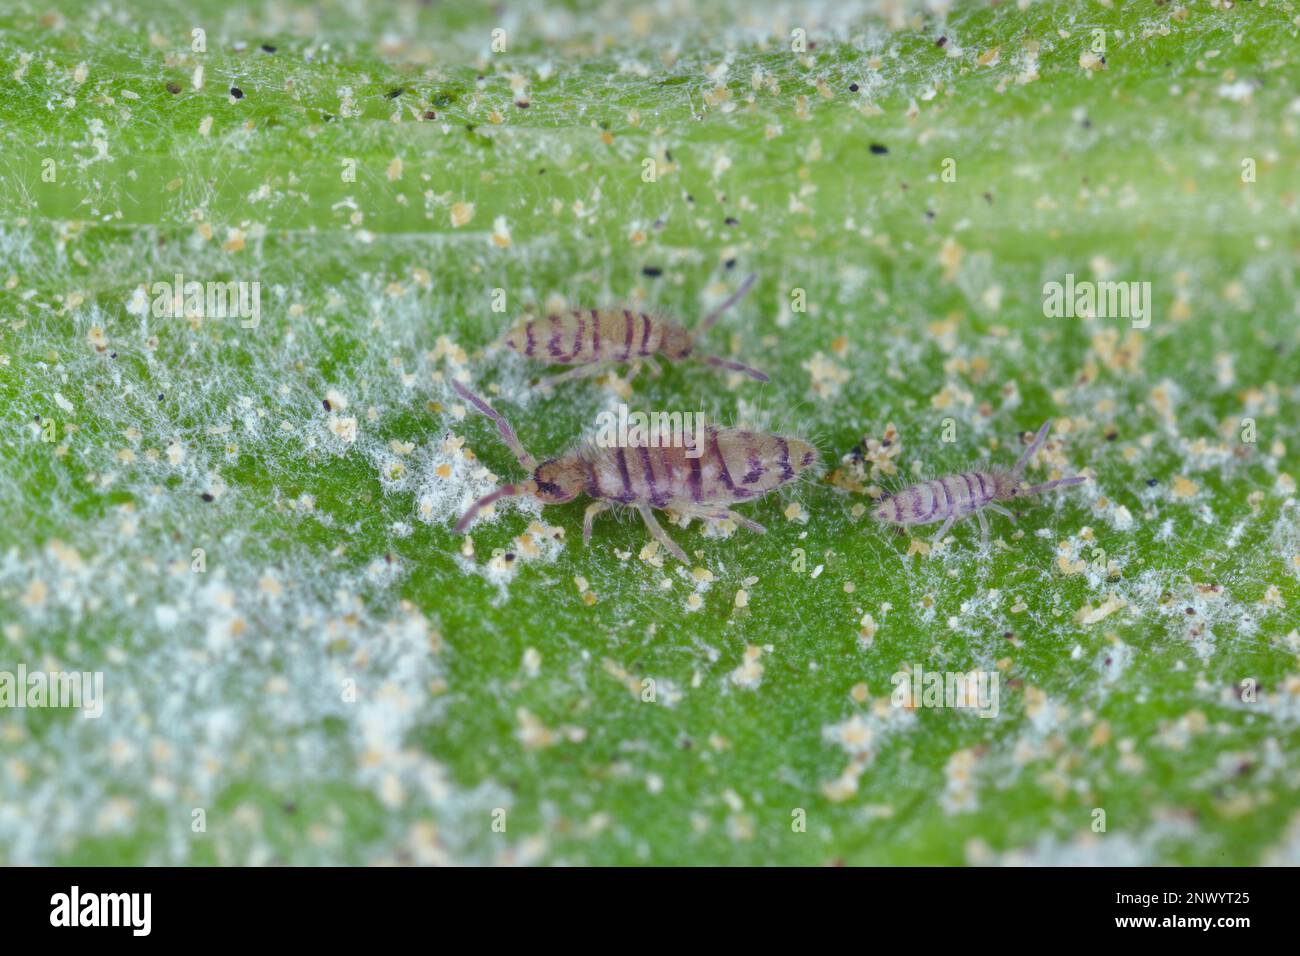 Entomobrya species springtails. They are tiny creatures that are pests of, among other things, flowers grown in homes. Eating powdery mildew fungi. Stock Photo